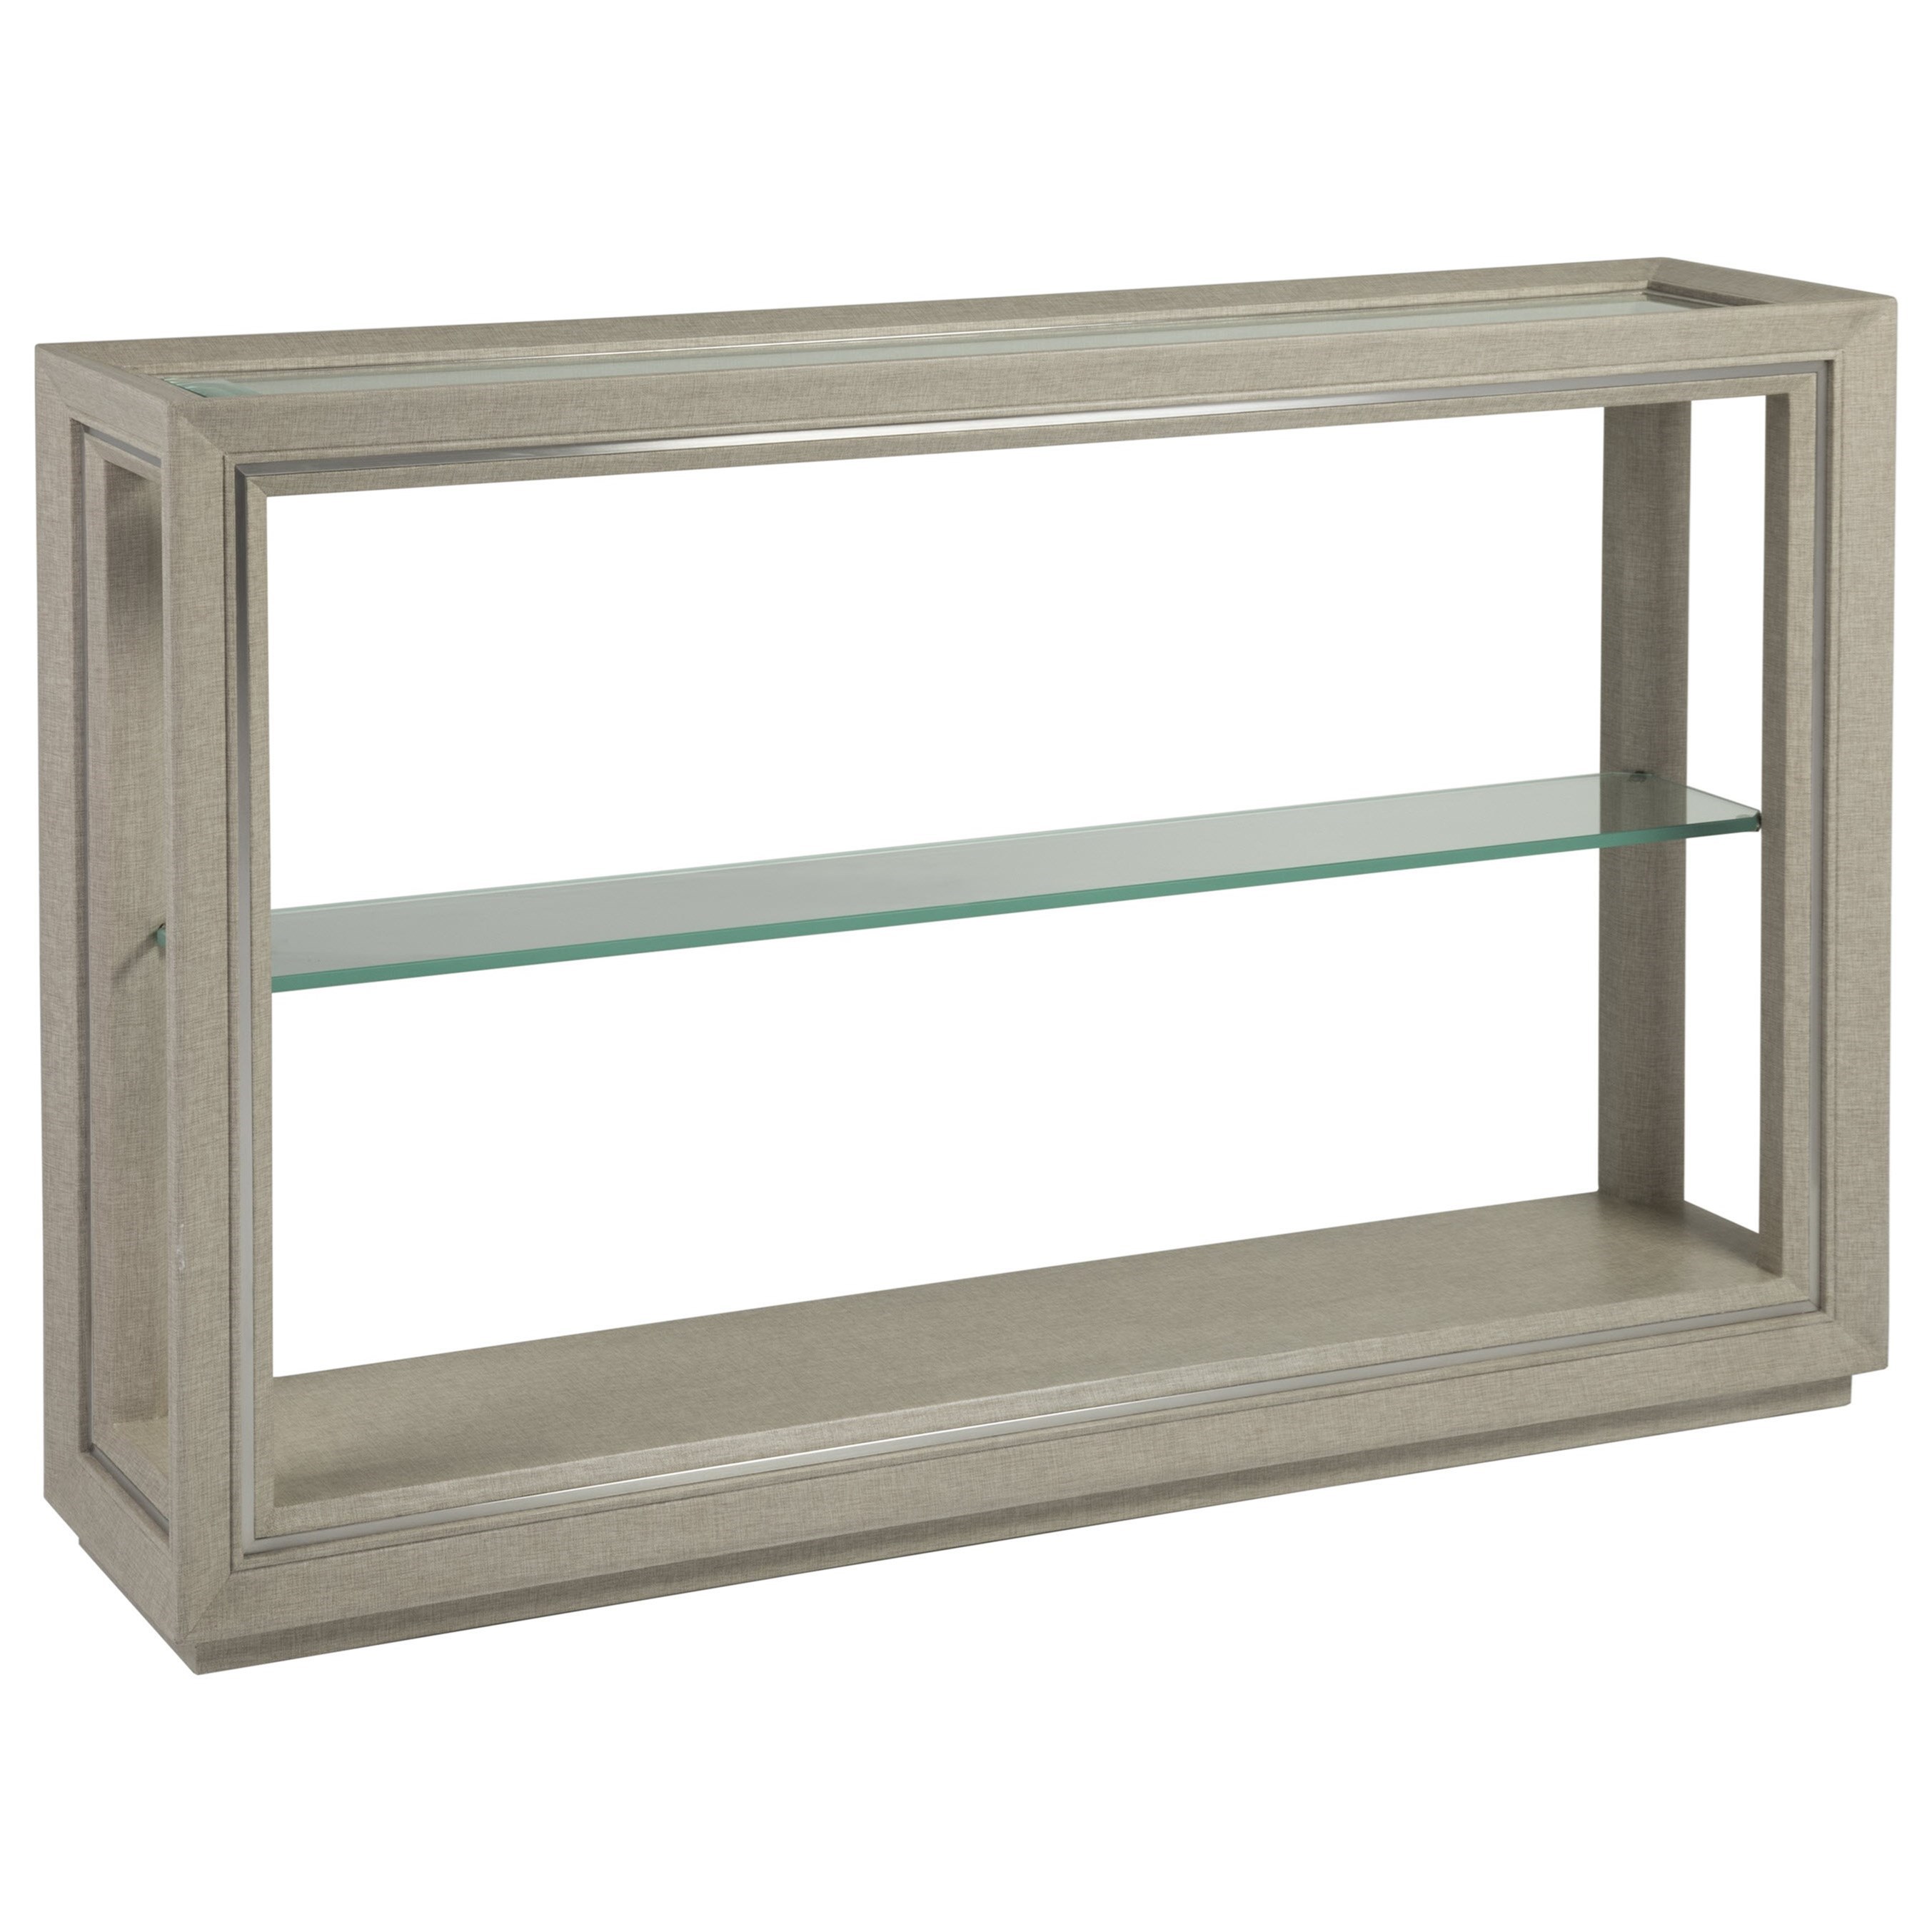 Contemporary Console Table with Glass Shelf